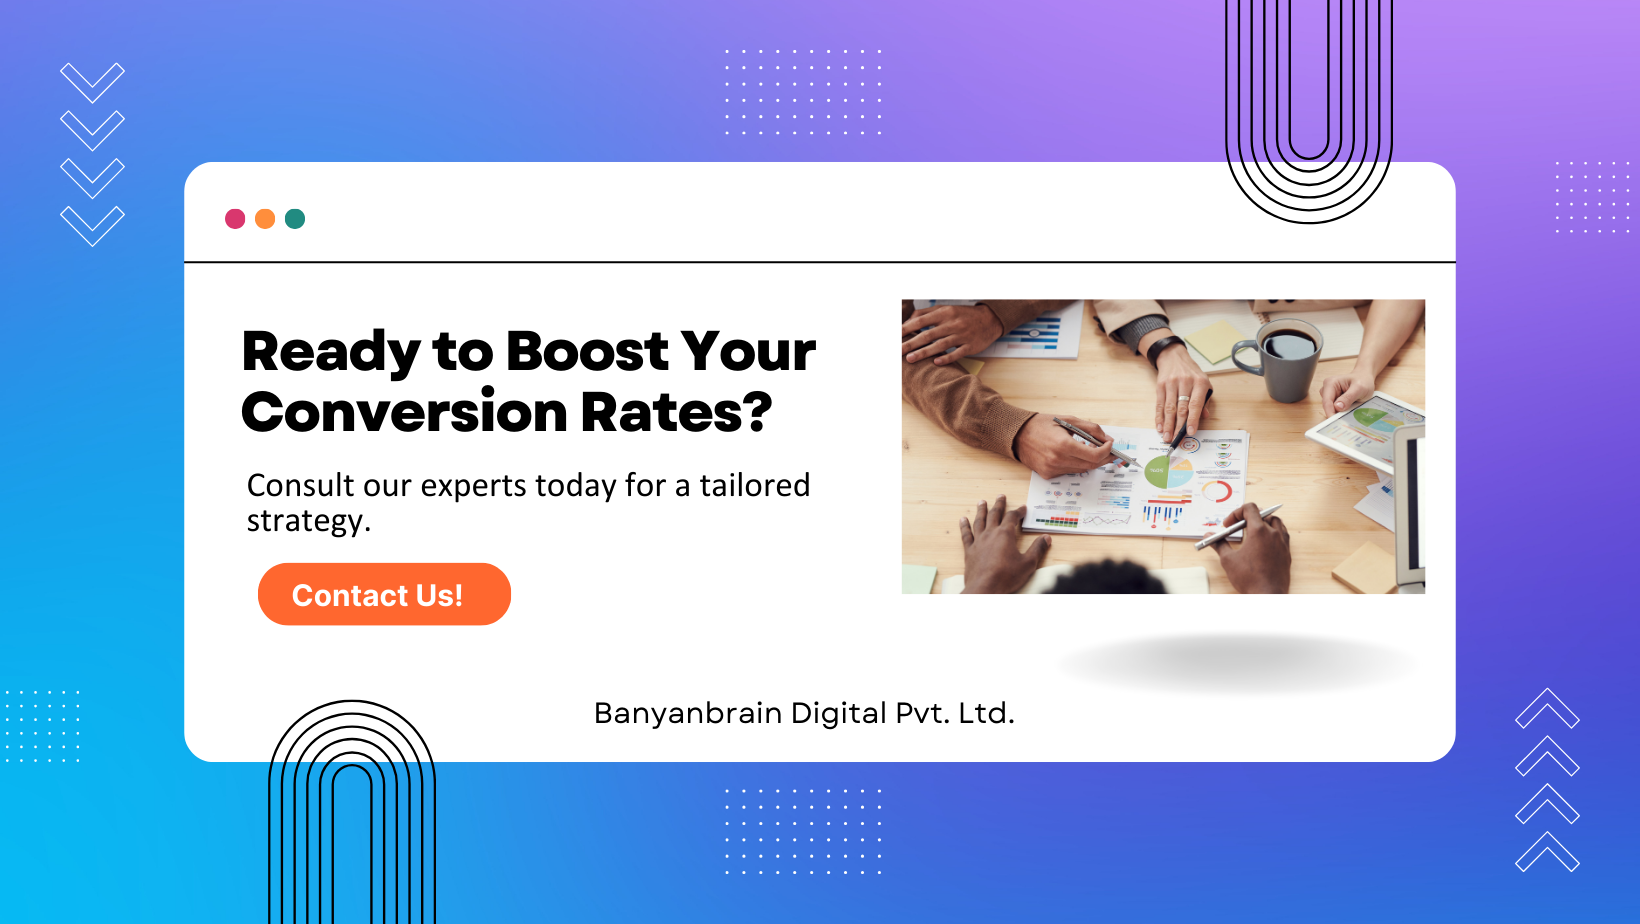 Contact us for boost your conversion rates